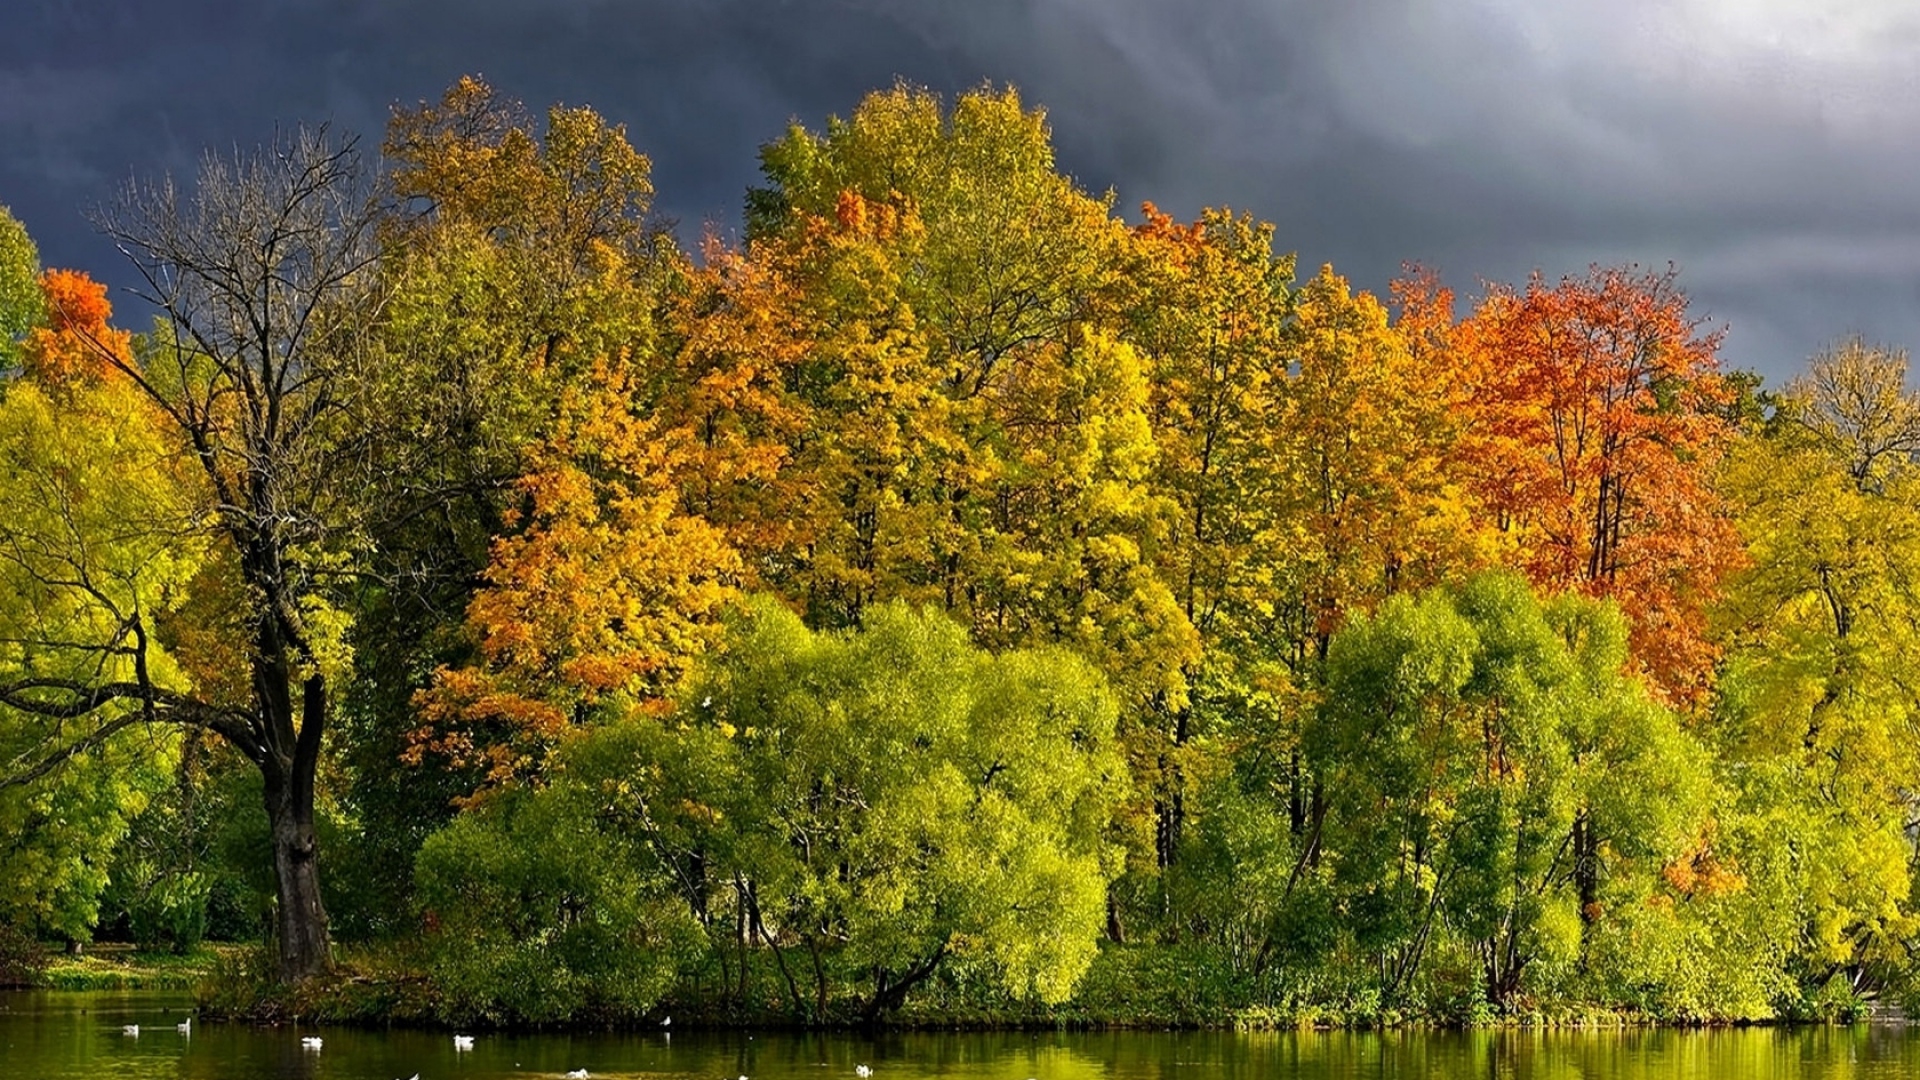 Download Wallpaper 1920x1080 trees, lake, autumn, cloudy, clouds, coast, wefts Full HD 1080p HD Background